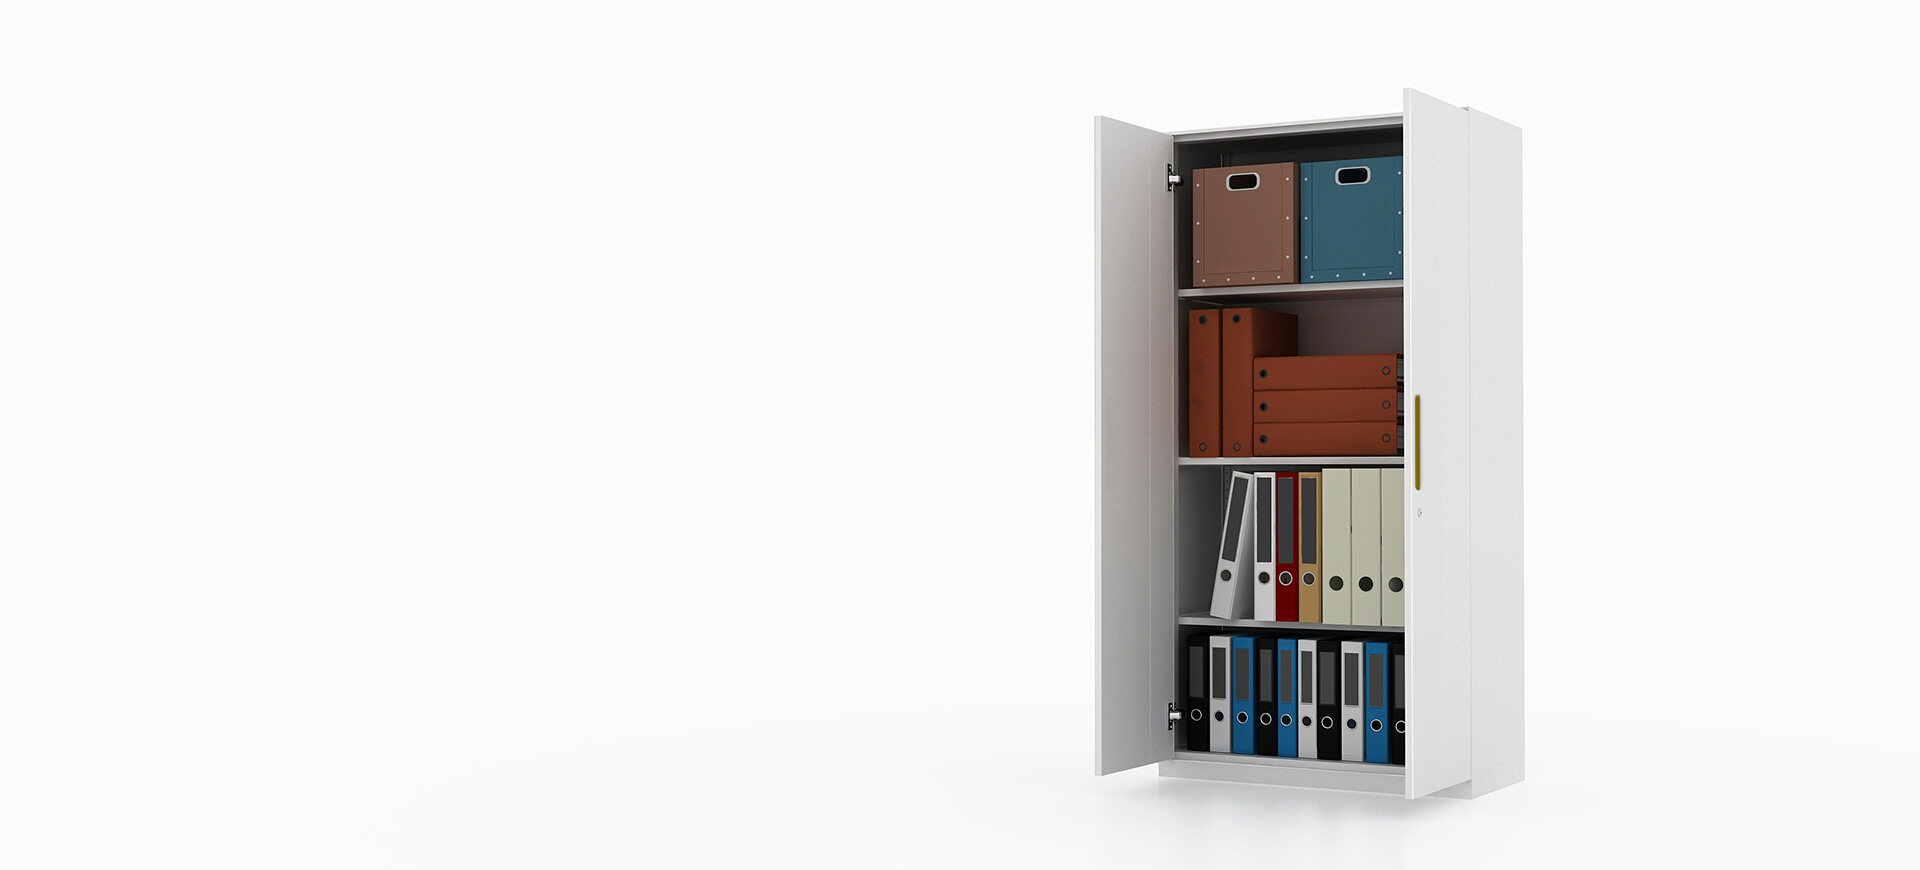 Archive cabinet,Document cabinet,Filing cabinet